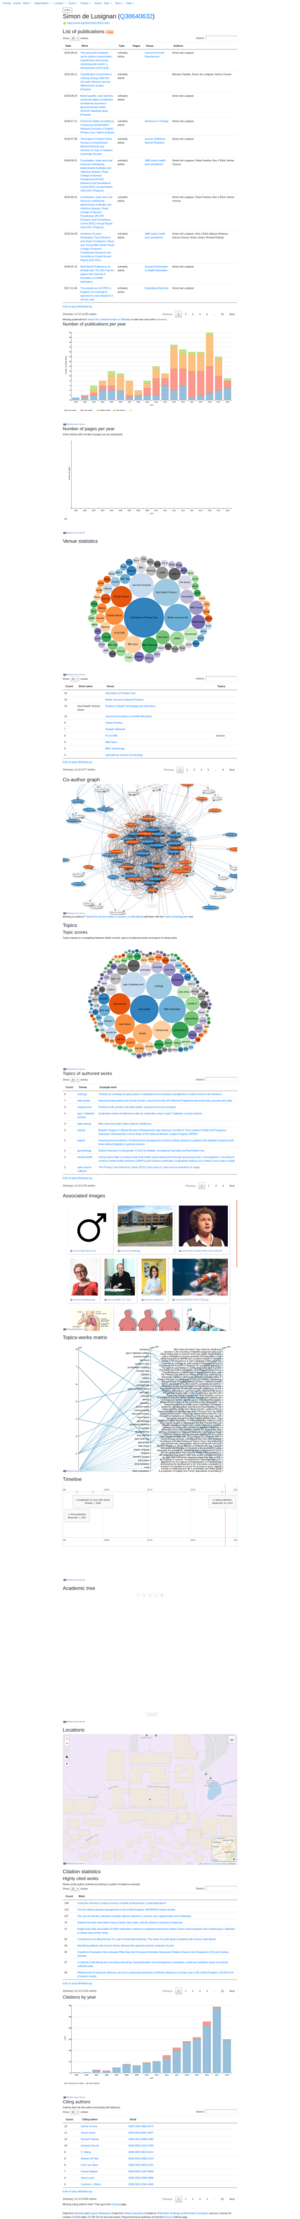 Scholia author page for item Q38640632 (Simon de Lusignan), as of 18 January 2019.png